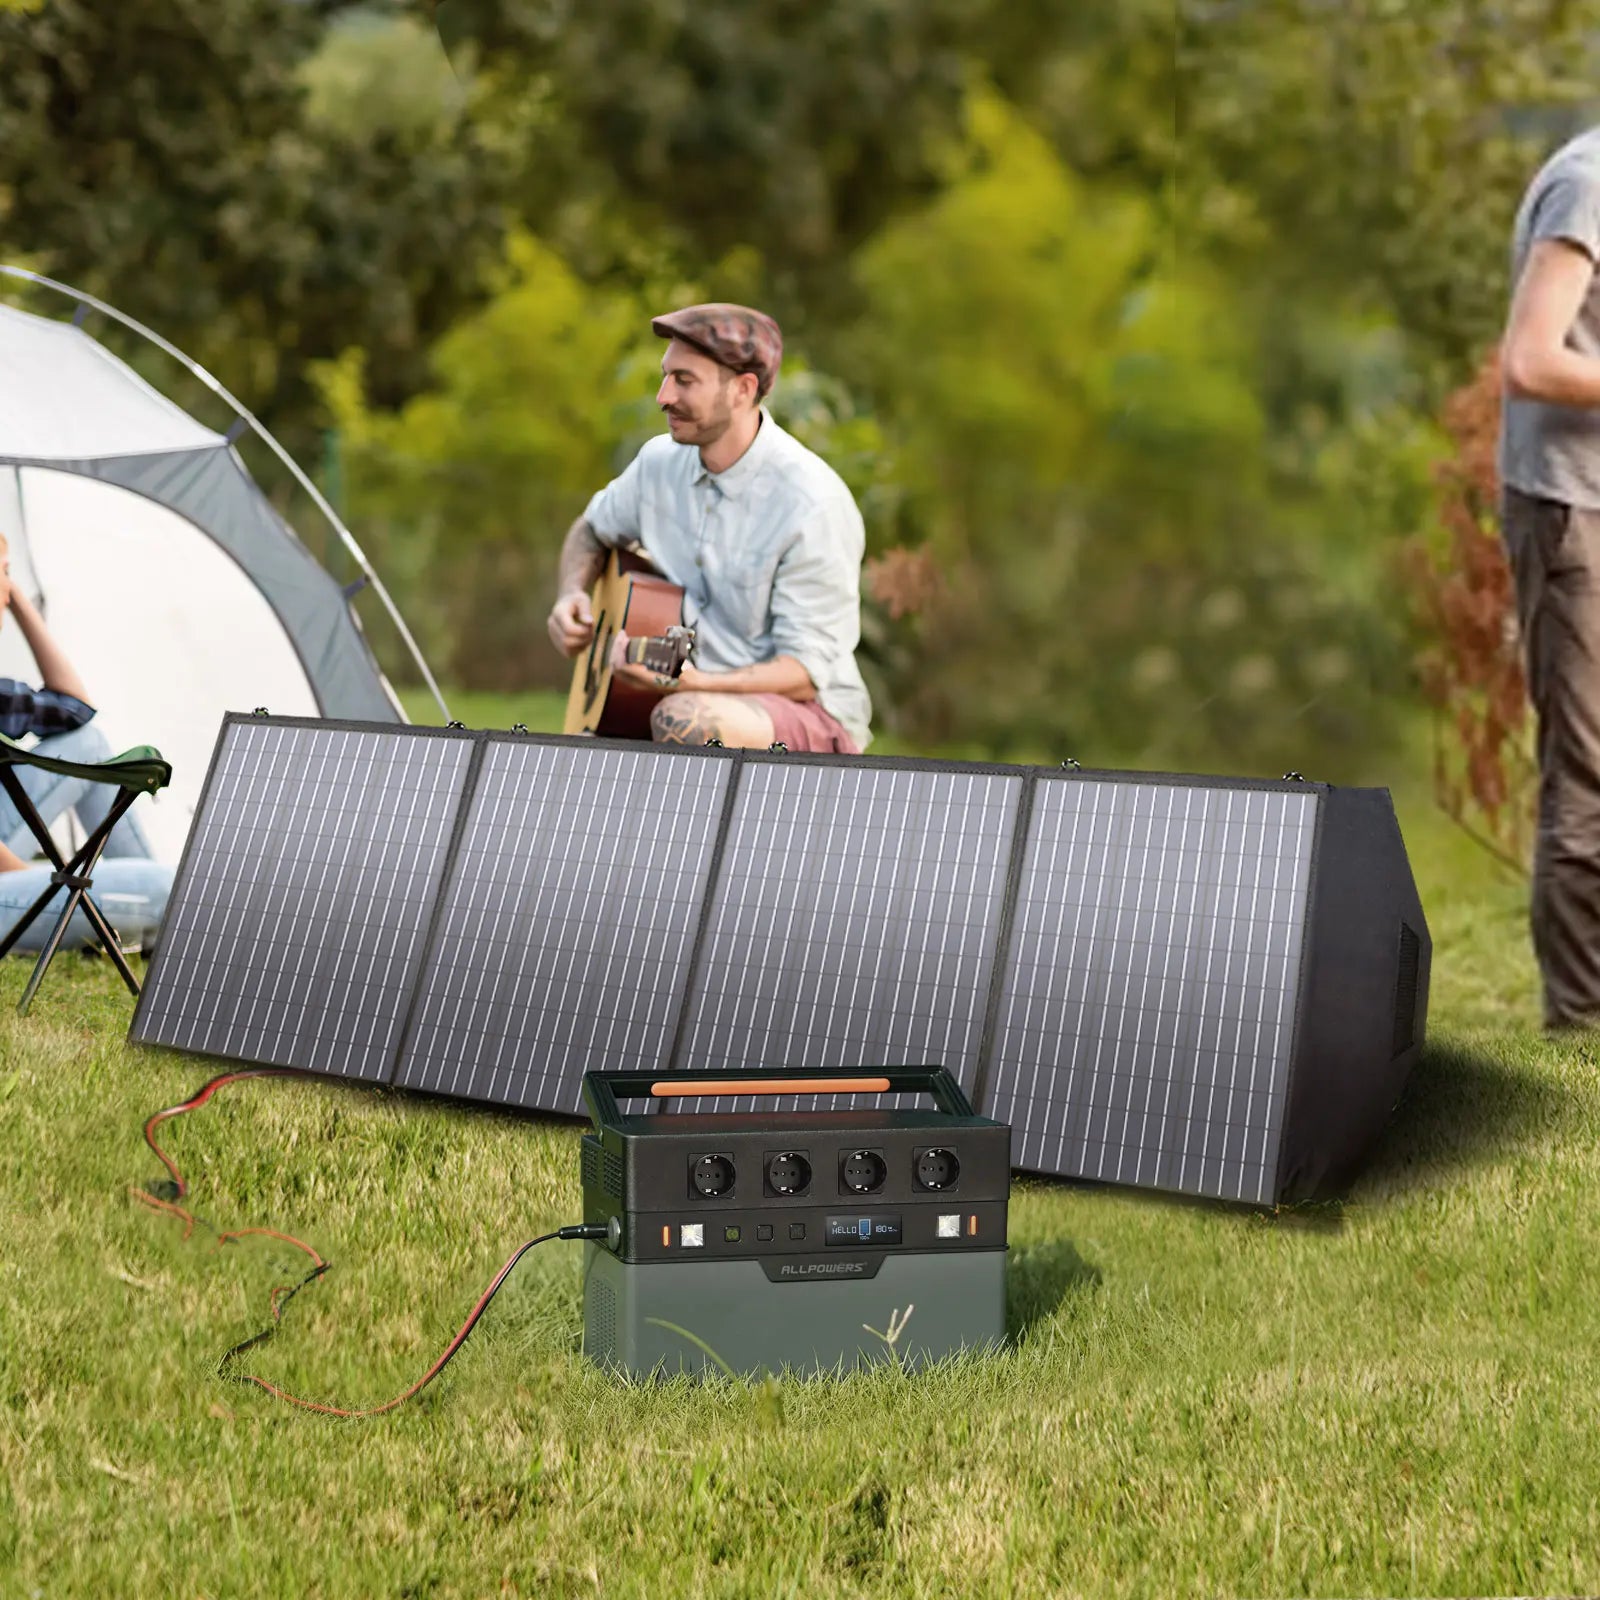 ALLPOWERS Portable Power Station: Outdoor Generator & Solar Panel for Mobile Power On-the-Go.